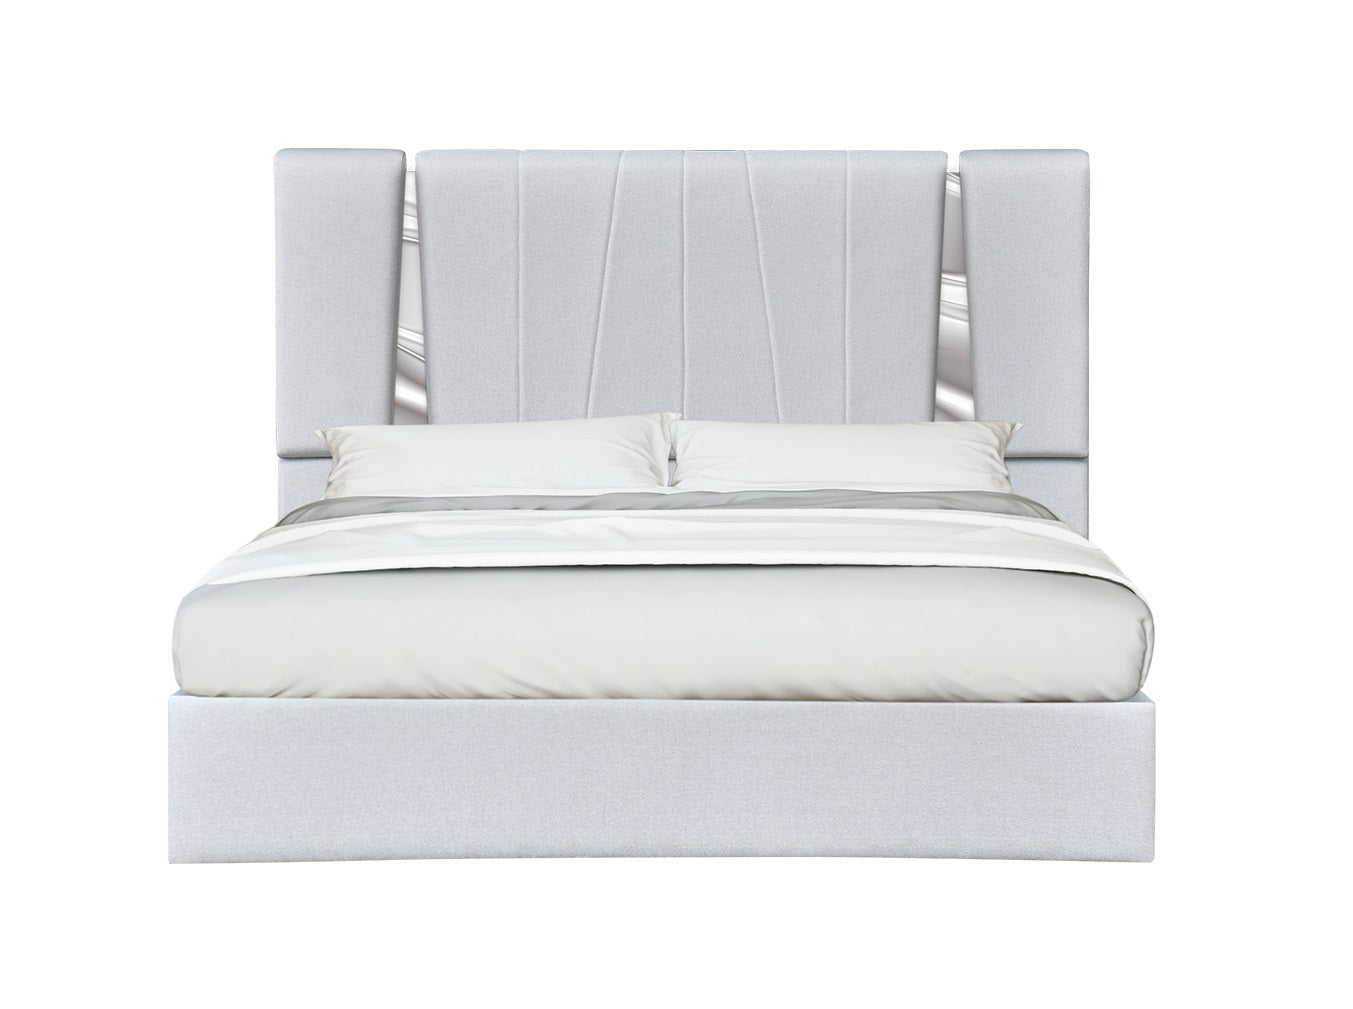 Matisse King Bed Silver Grey by JM